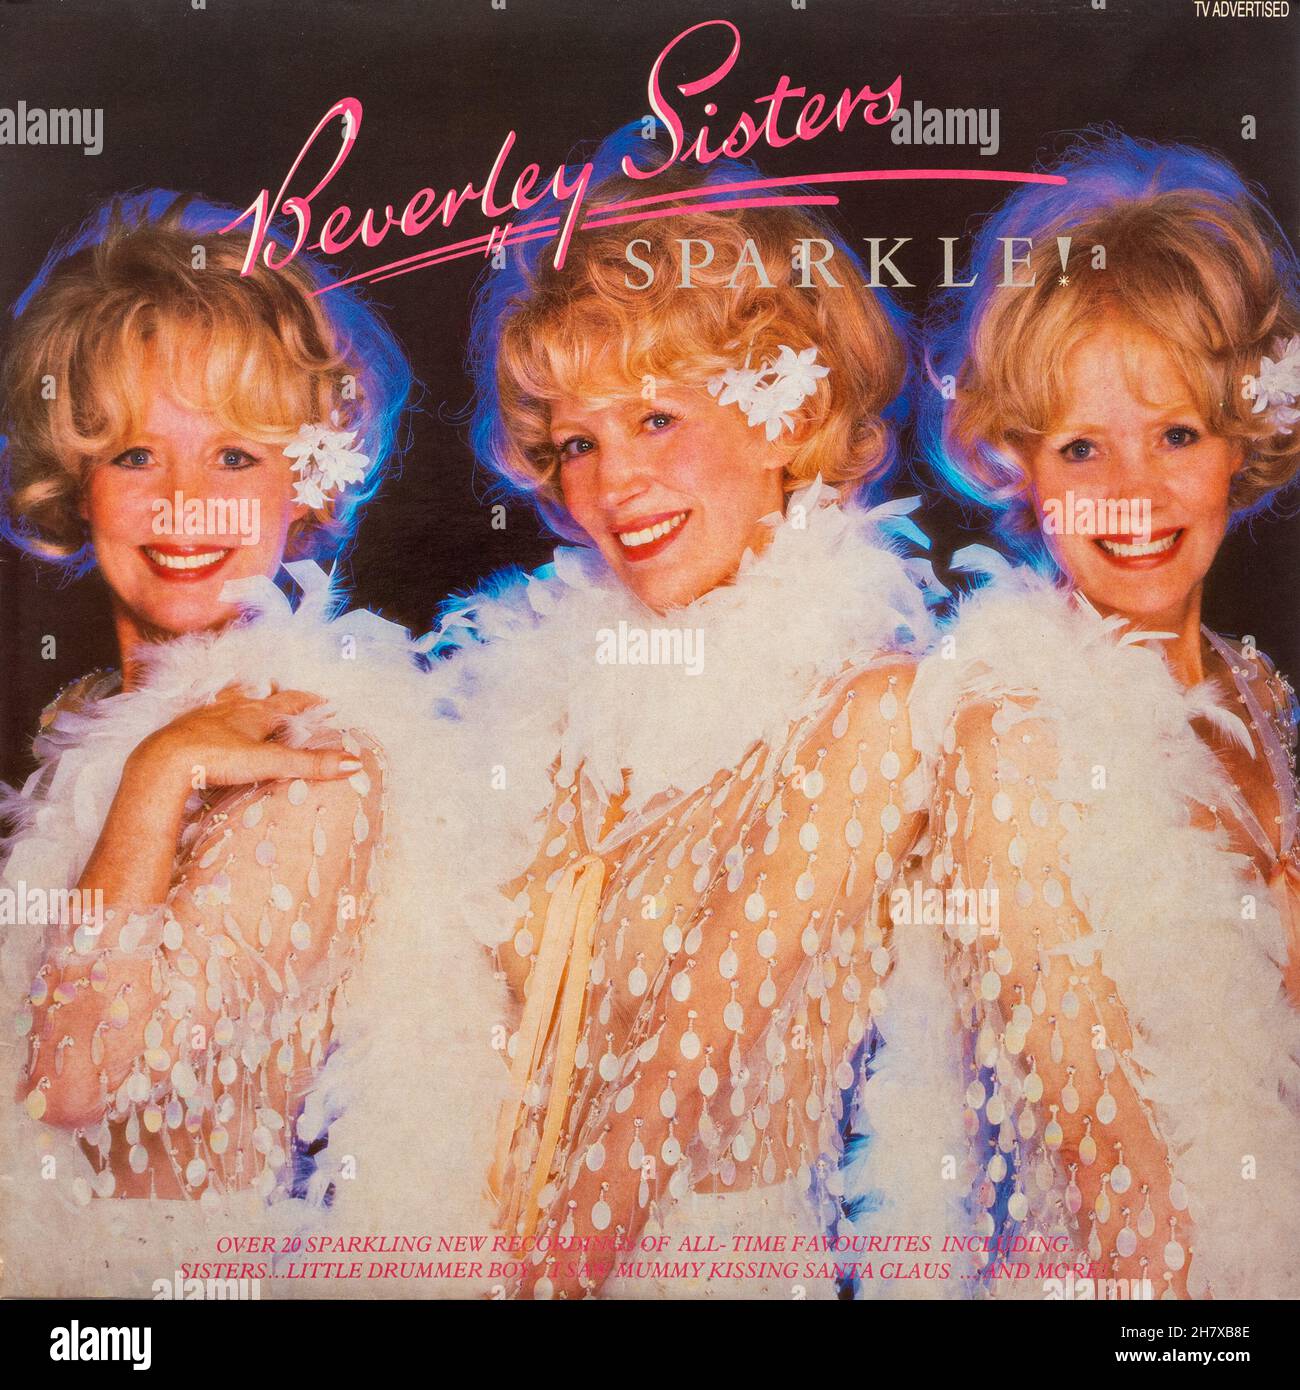 Beverley Sisters album Sparkle, 1985 vinyl LP record cover by the English singing trio Stock Photo